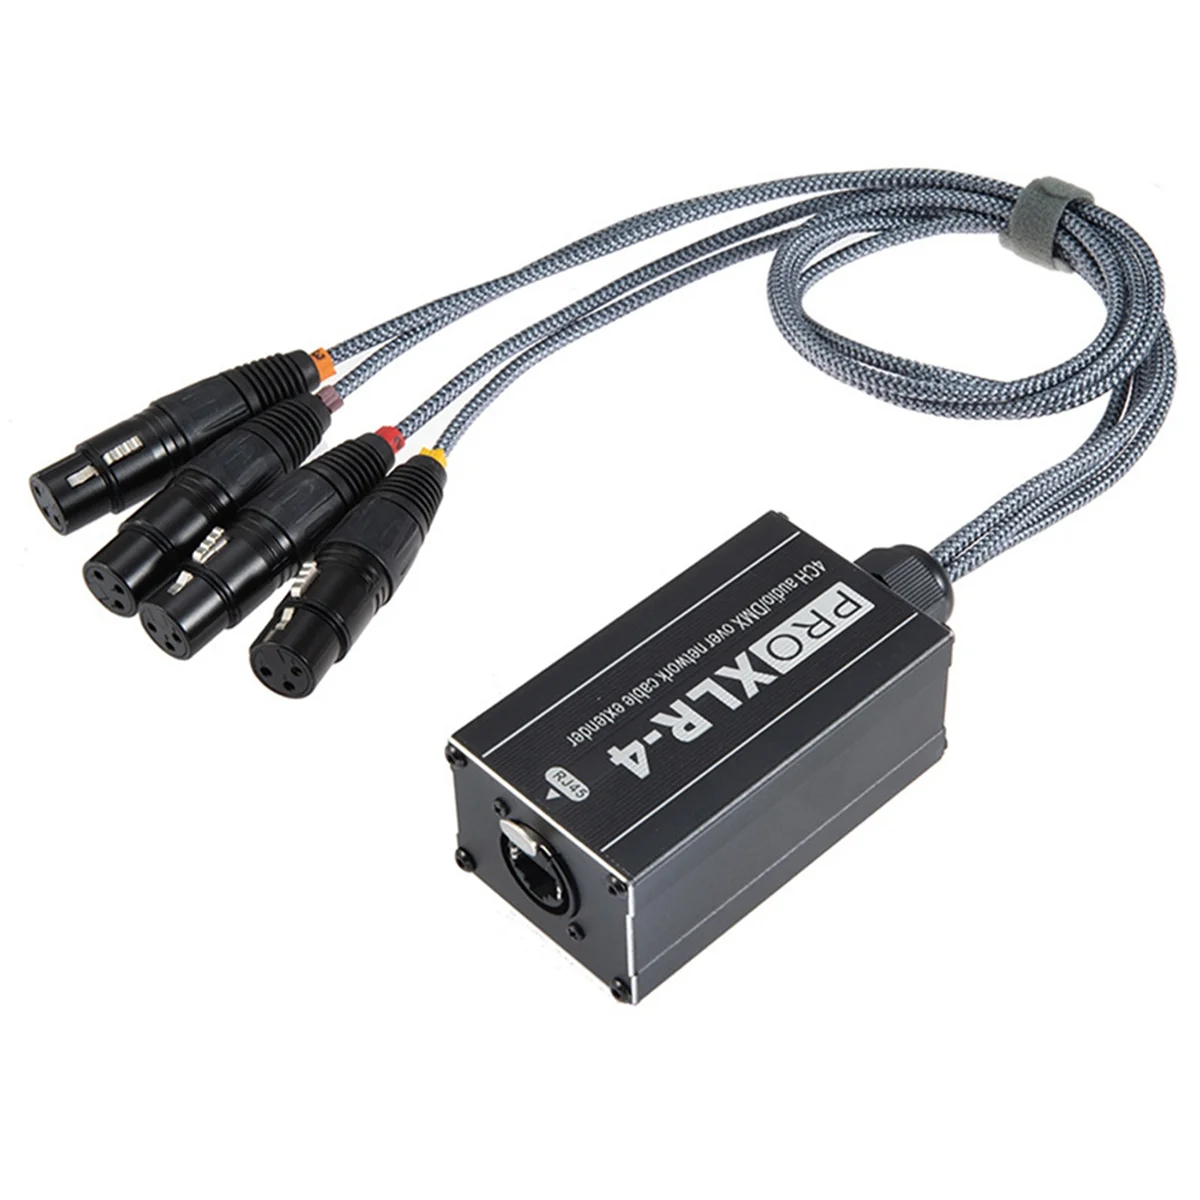 

RJ45 to XLR Female Audio Cable Network DMX Splitter for Snake Cable Network Extension of Stage or Studio Recording